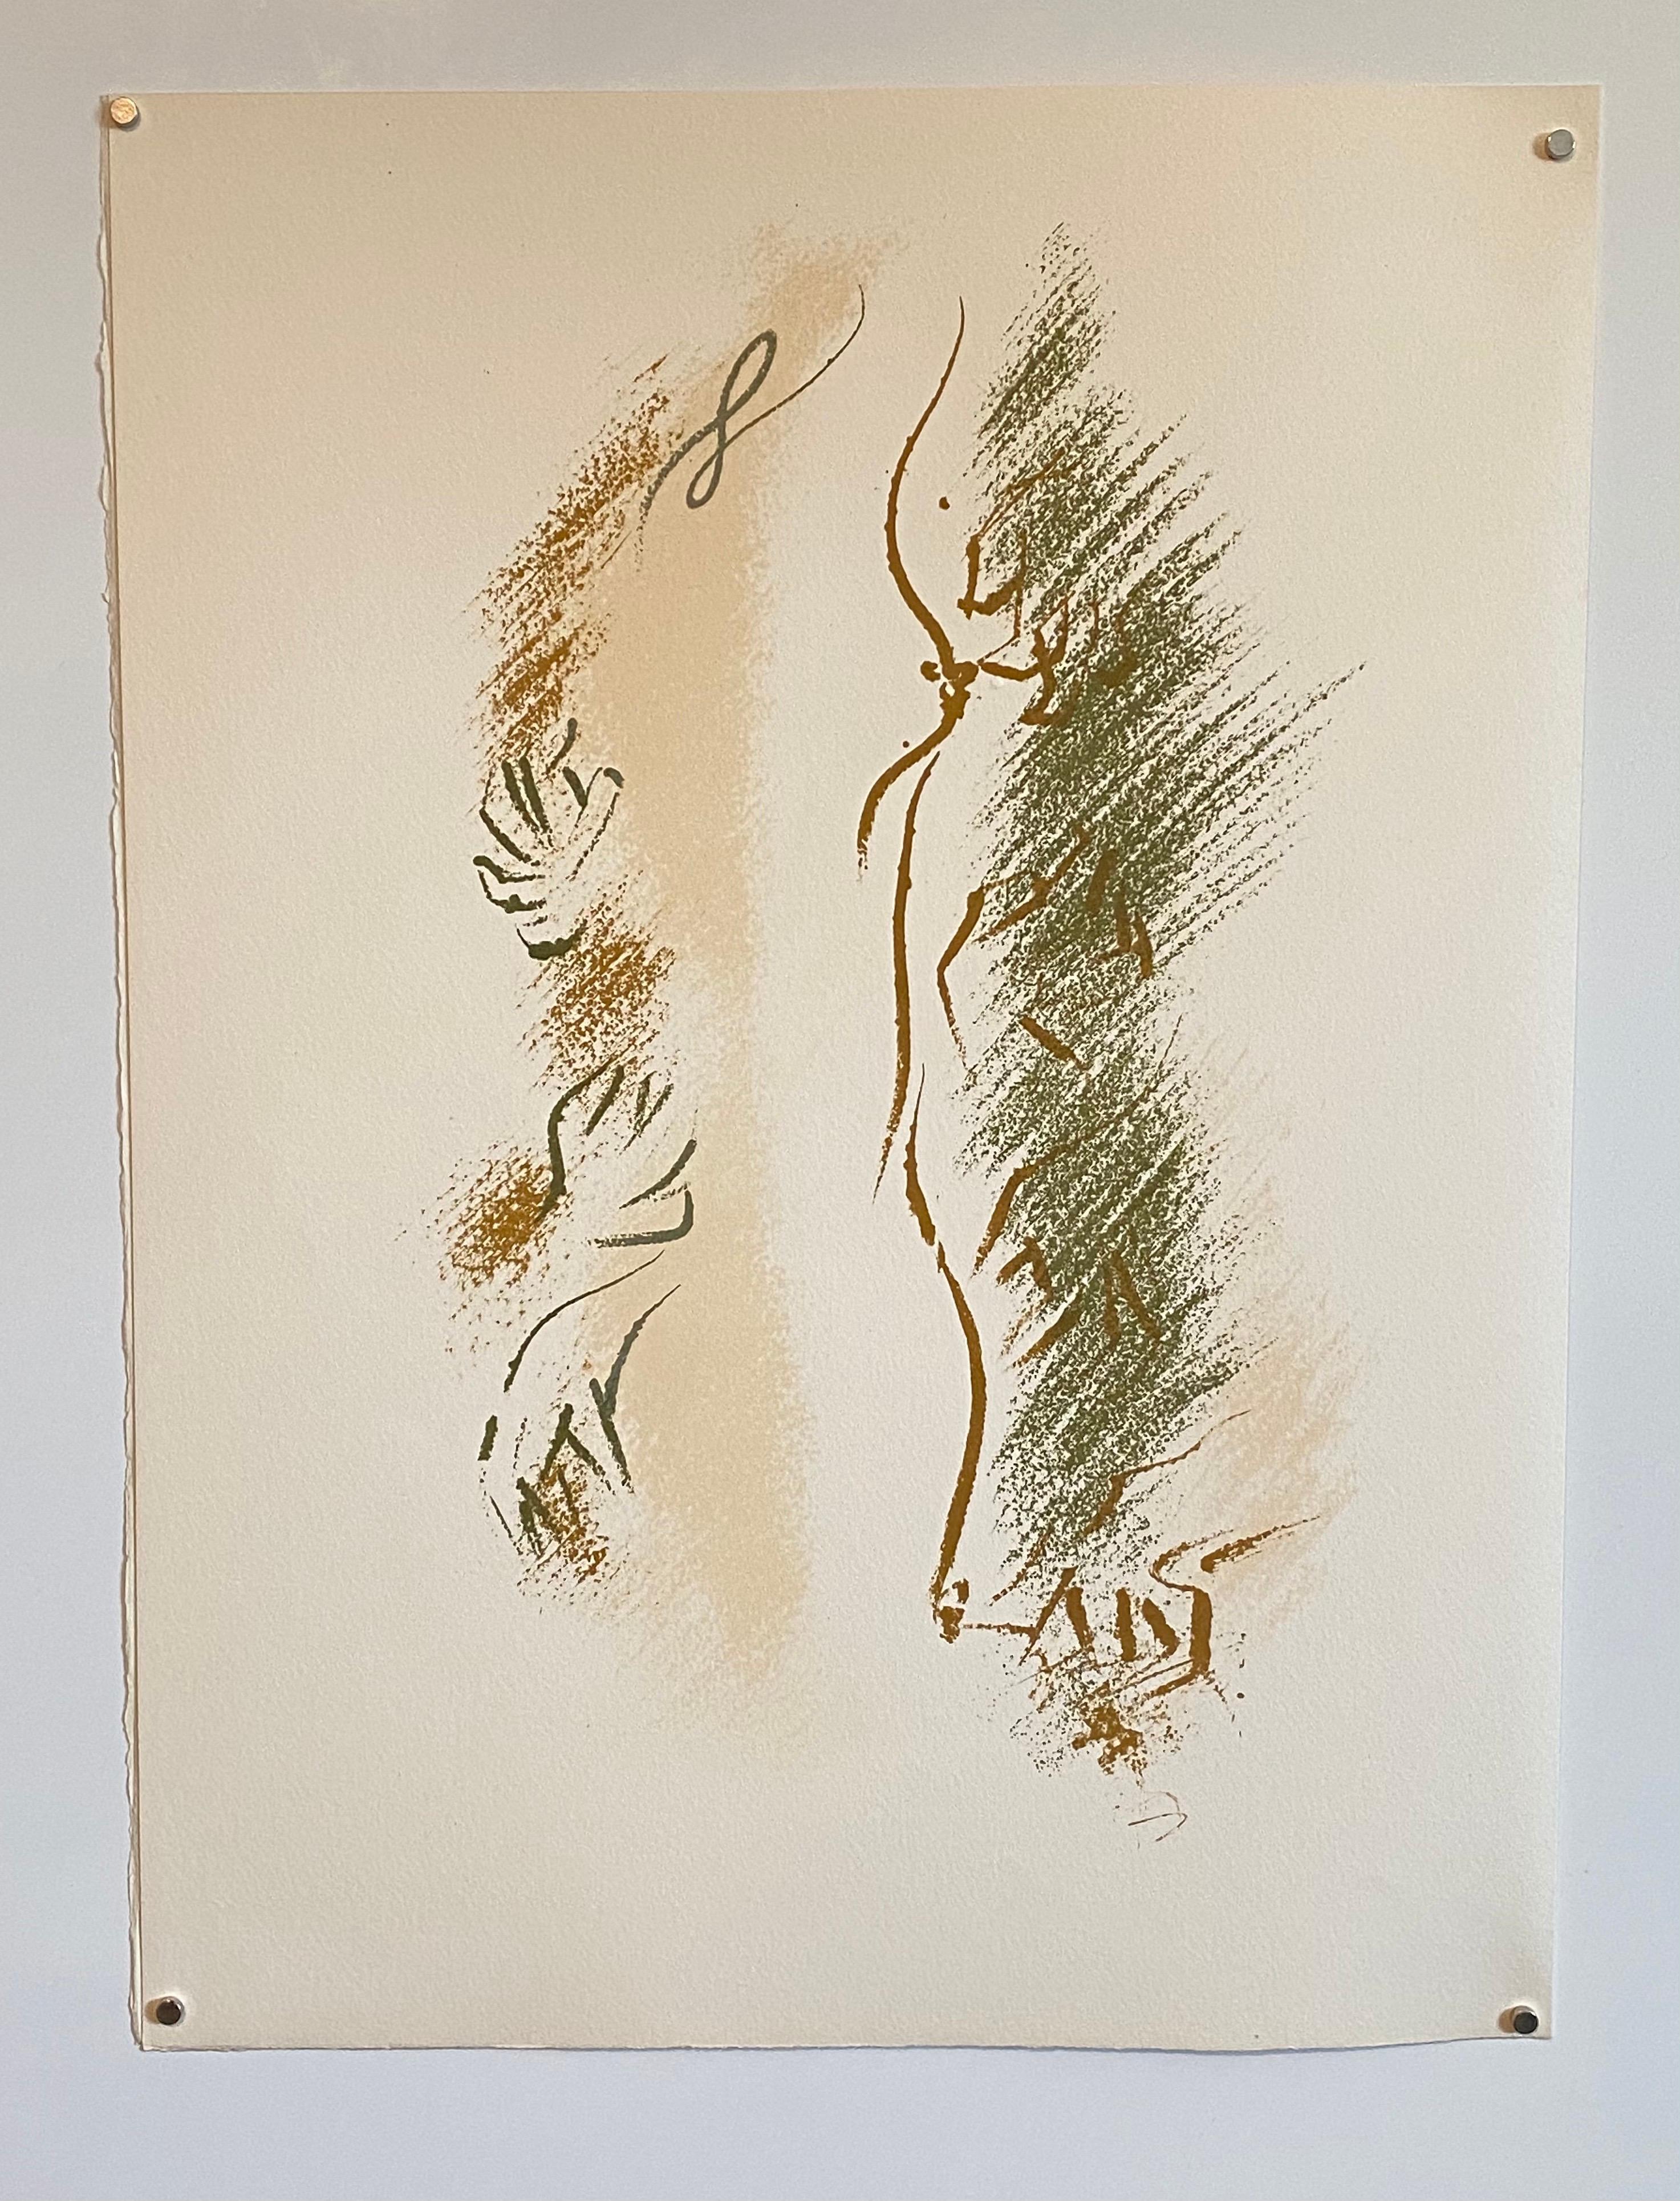 French Abstract Surrealist Lithograph Andre Masson Mourlot Paris Limited Edition 3